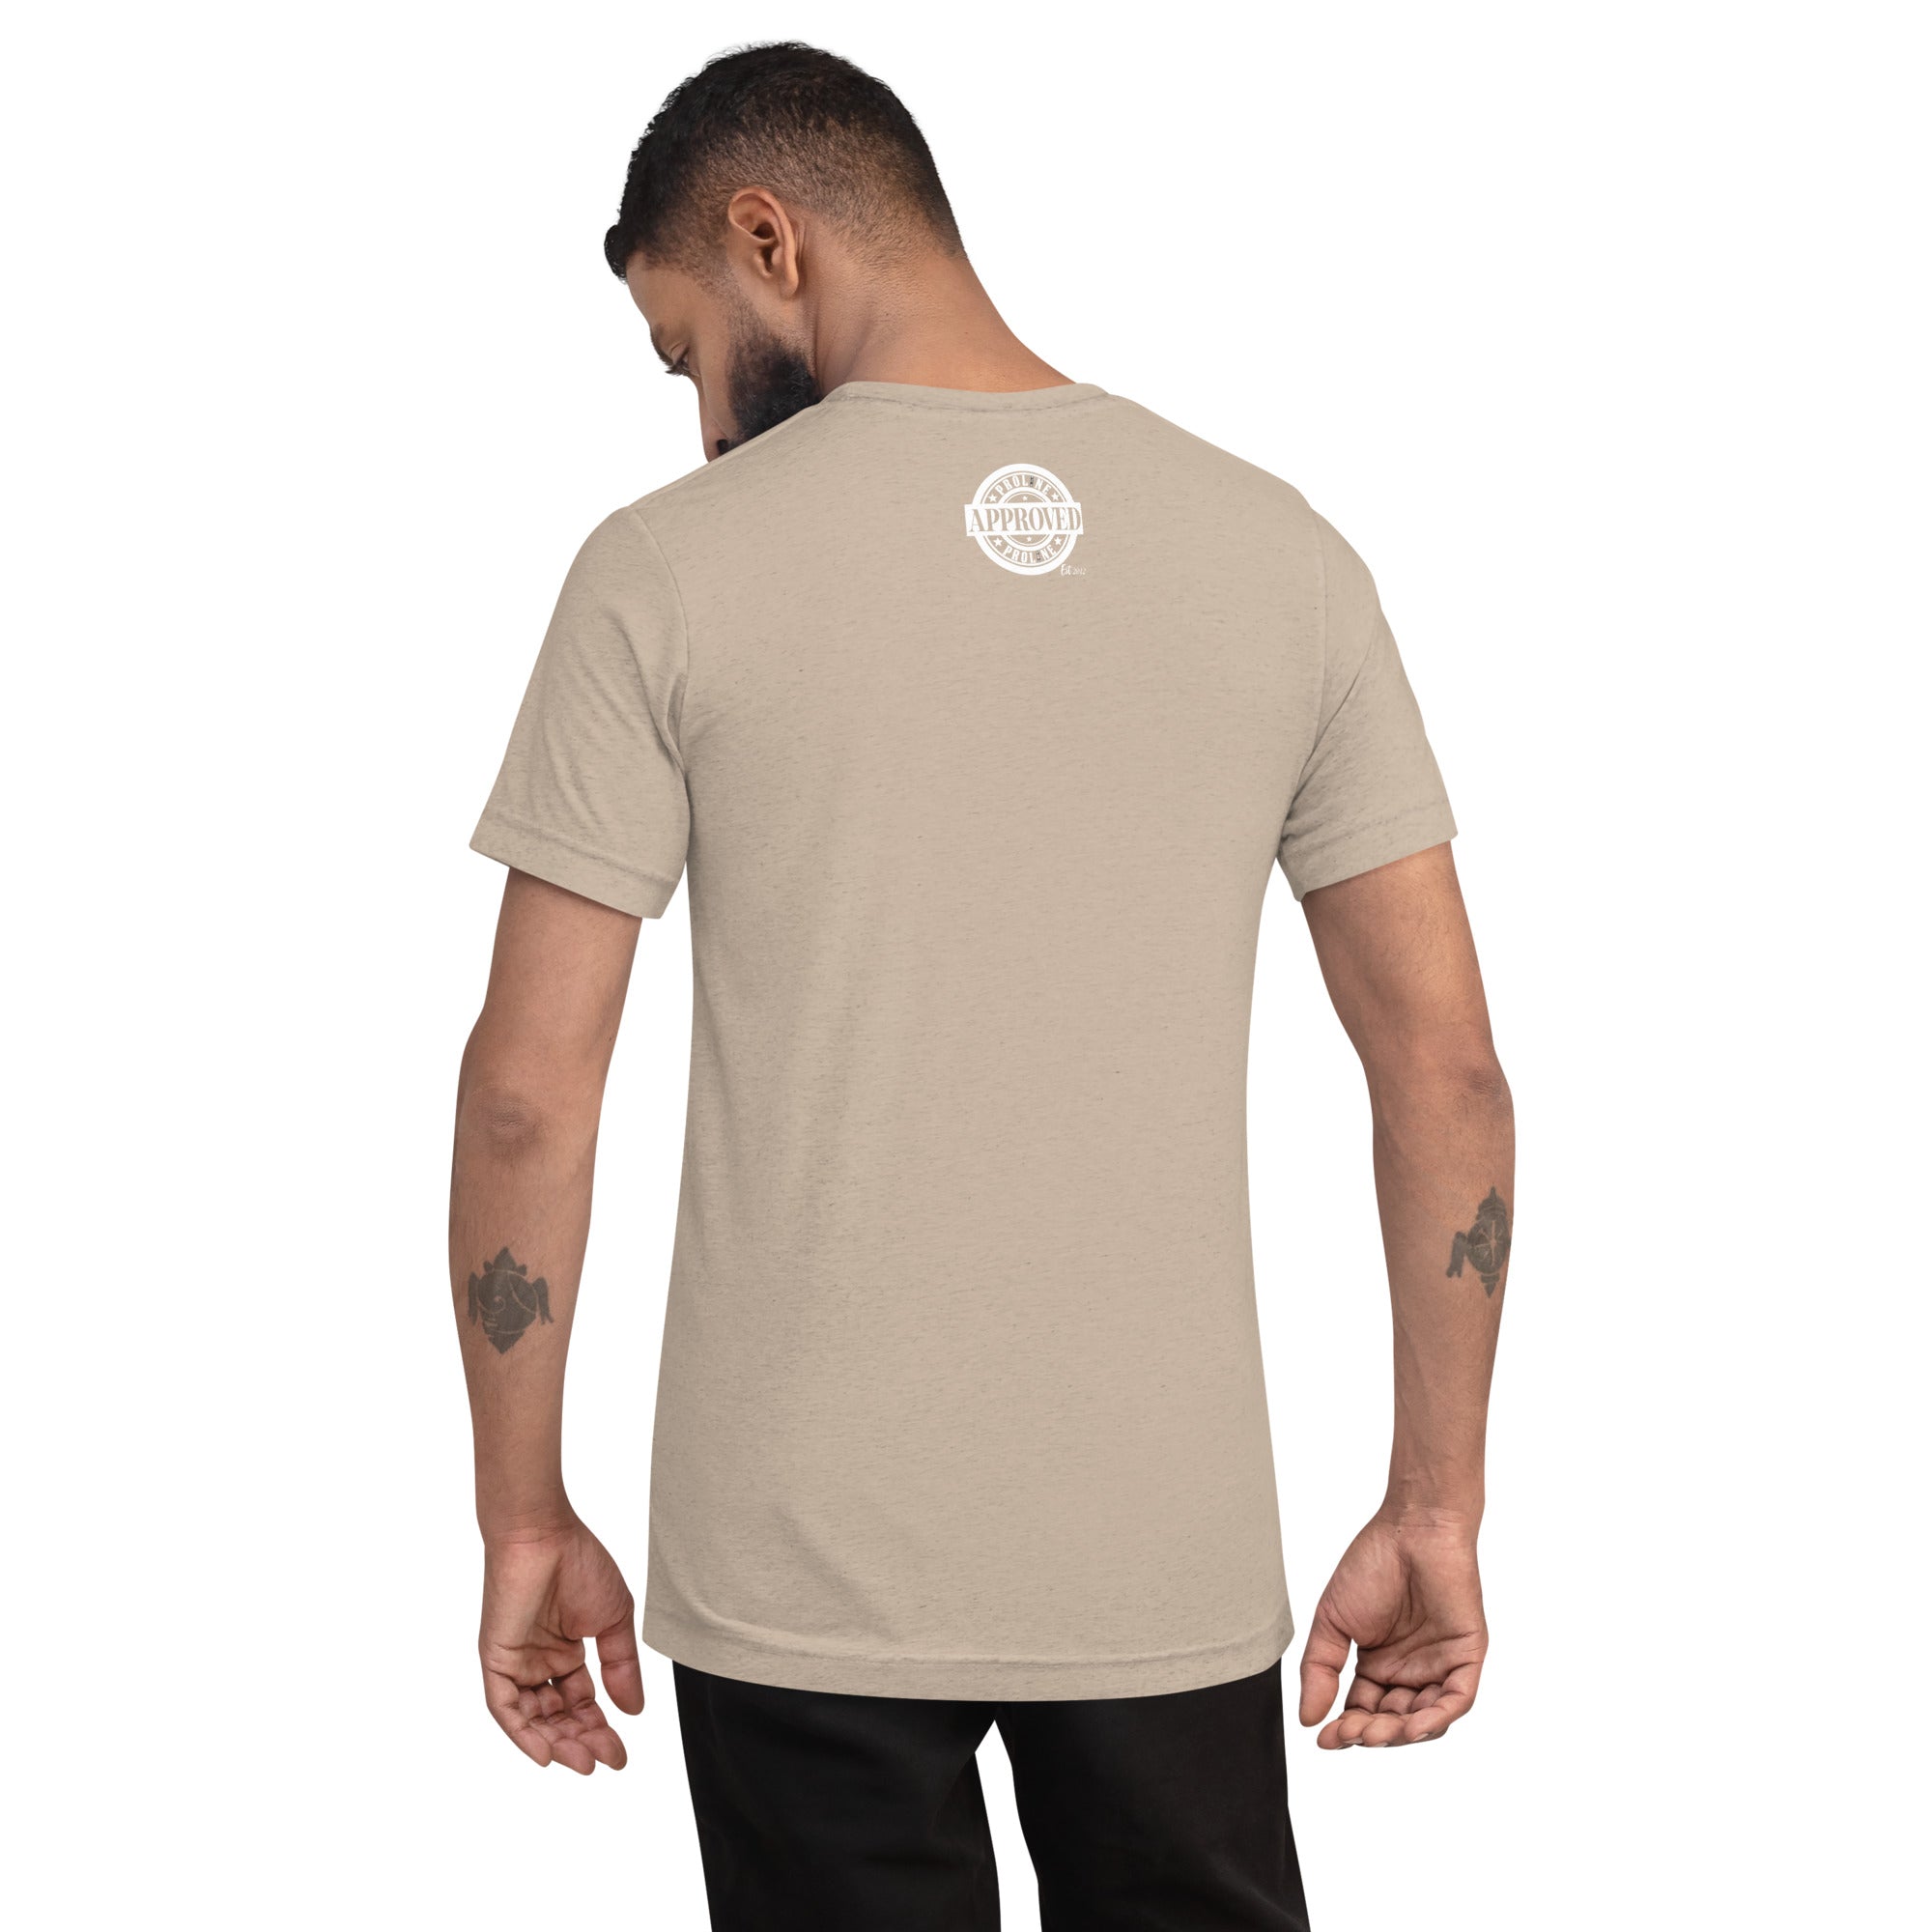 Proline Approved Short Sleeve Tee